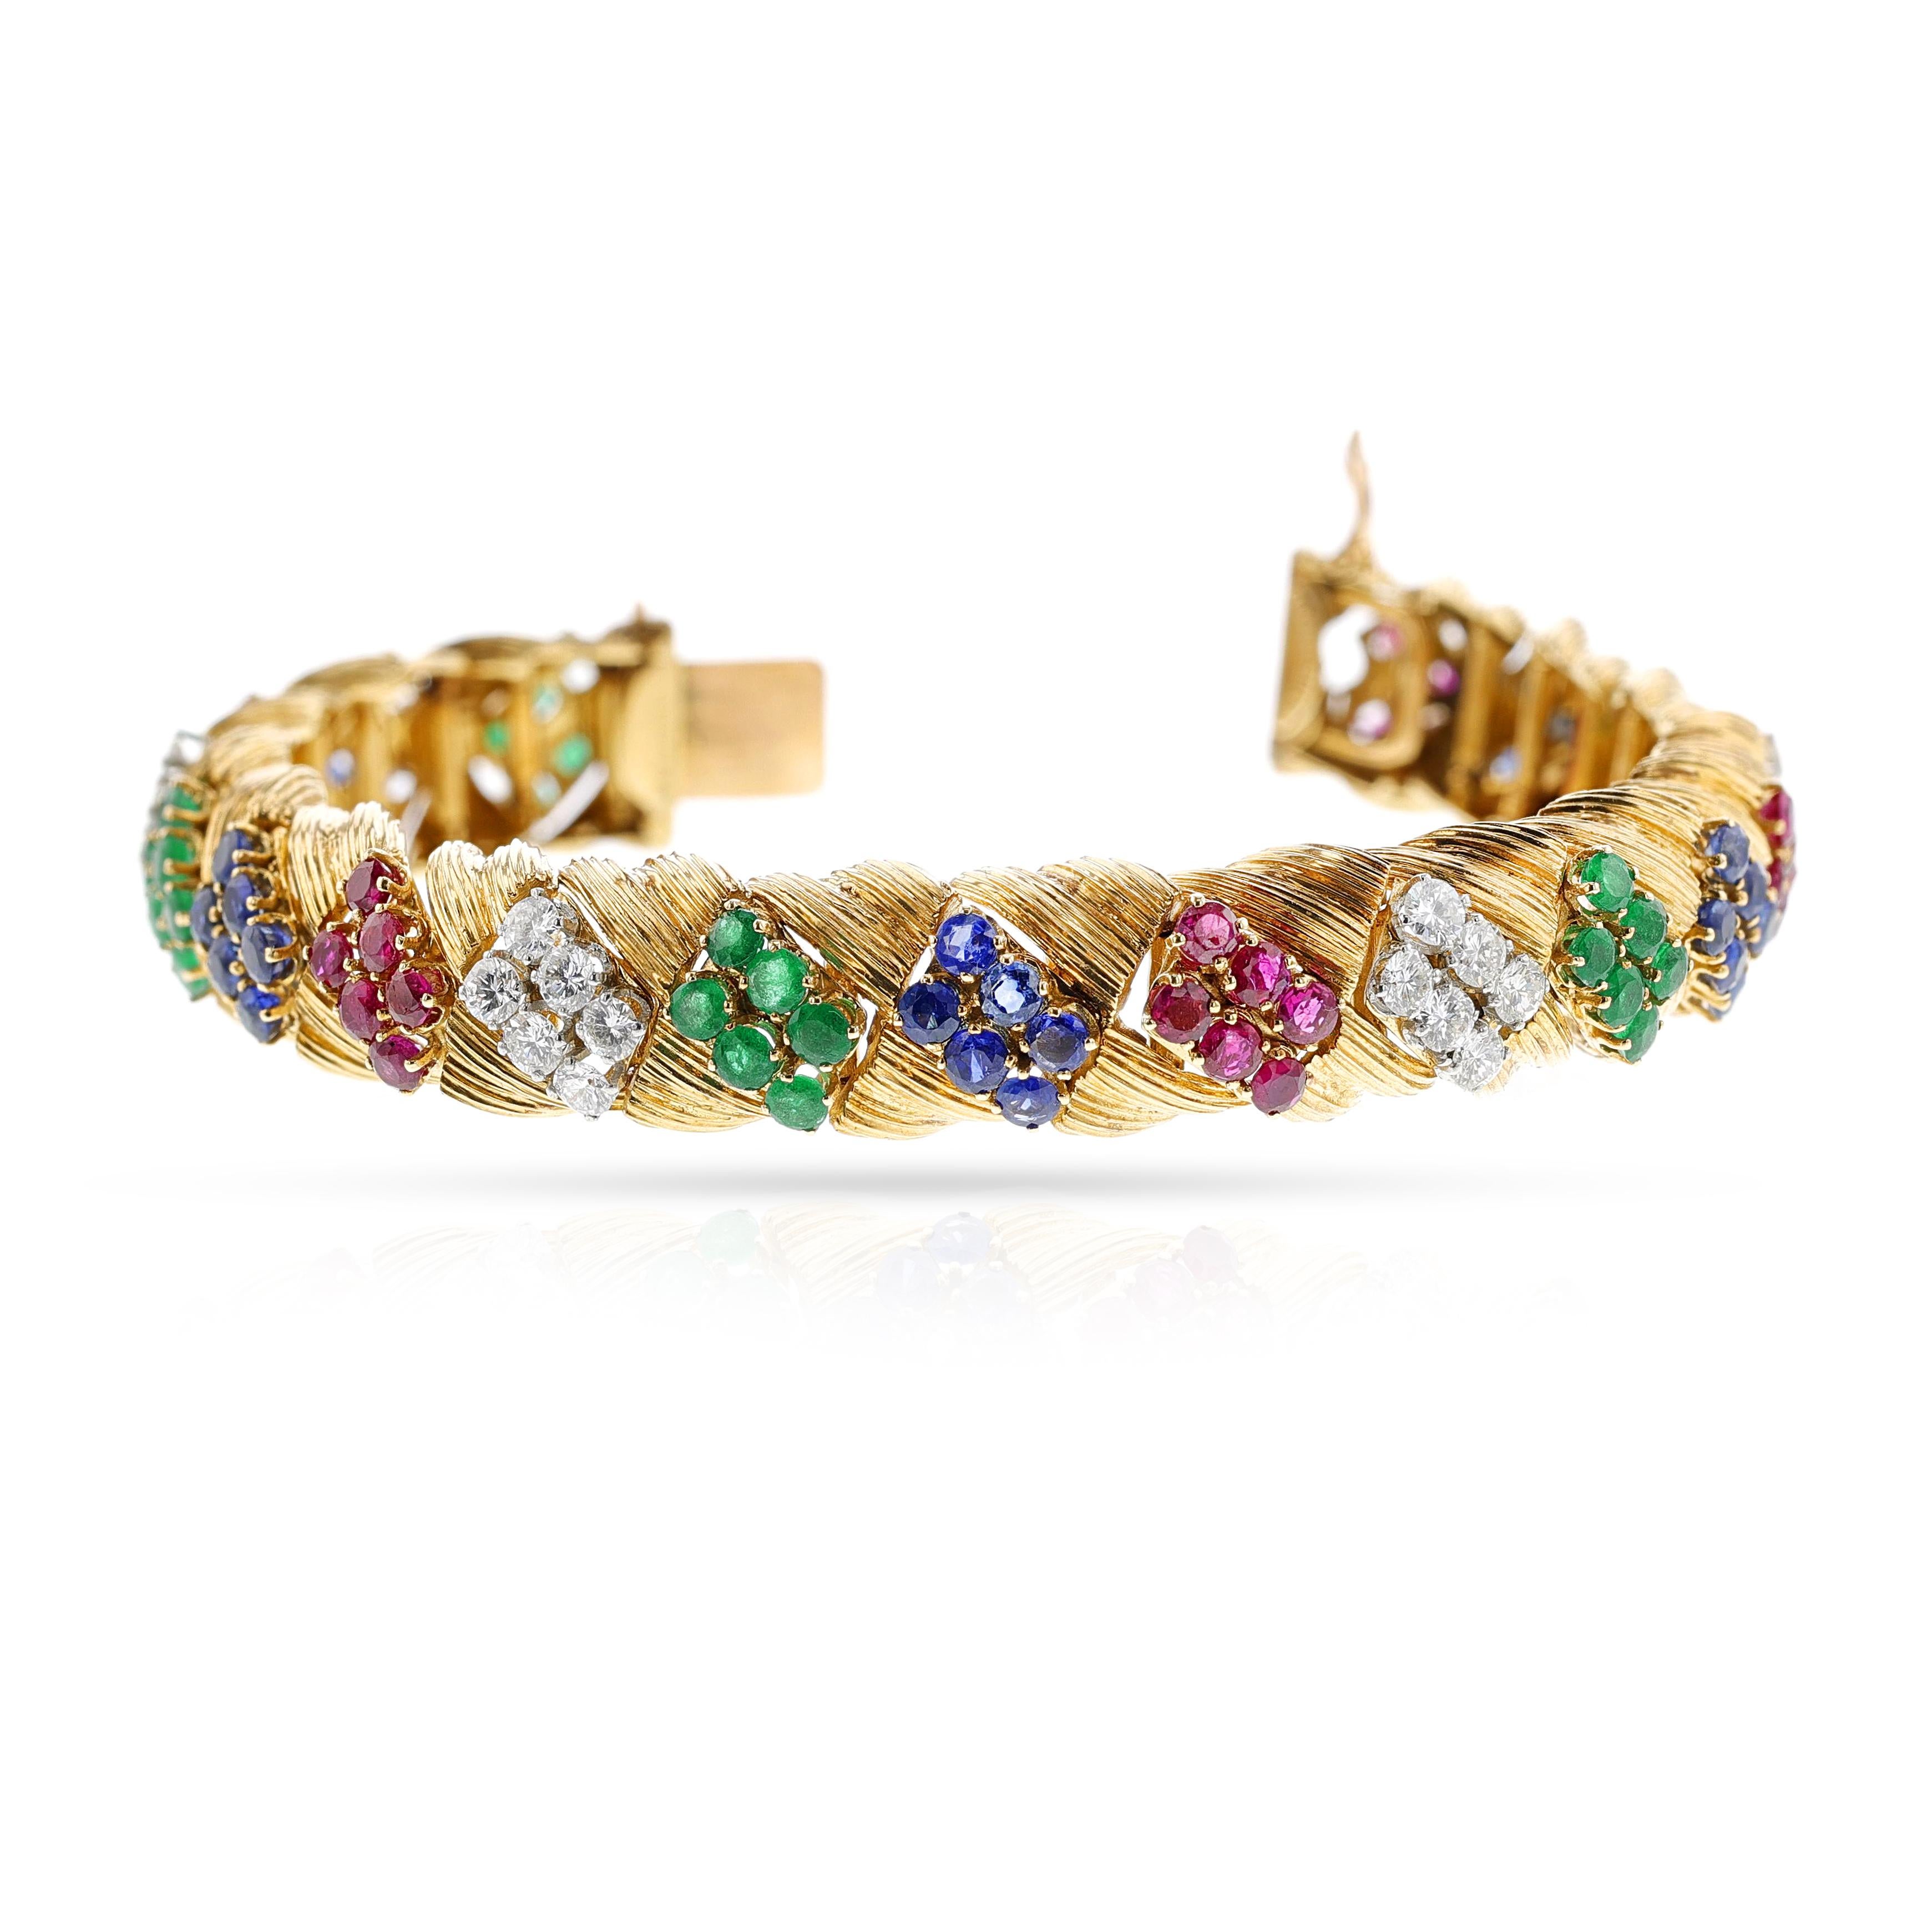 A Mauboussin Ruby, Emerald, Sapphire and Diamond Bracelet made in 18k Yellow Gold. Emeralds appx. 3.6 carats. Sapphires: appx. 4.5 carats. Rubies appx 4.5 carats. The diamonds weigh appx. 3 carats. The length is 7.